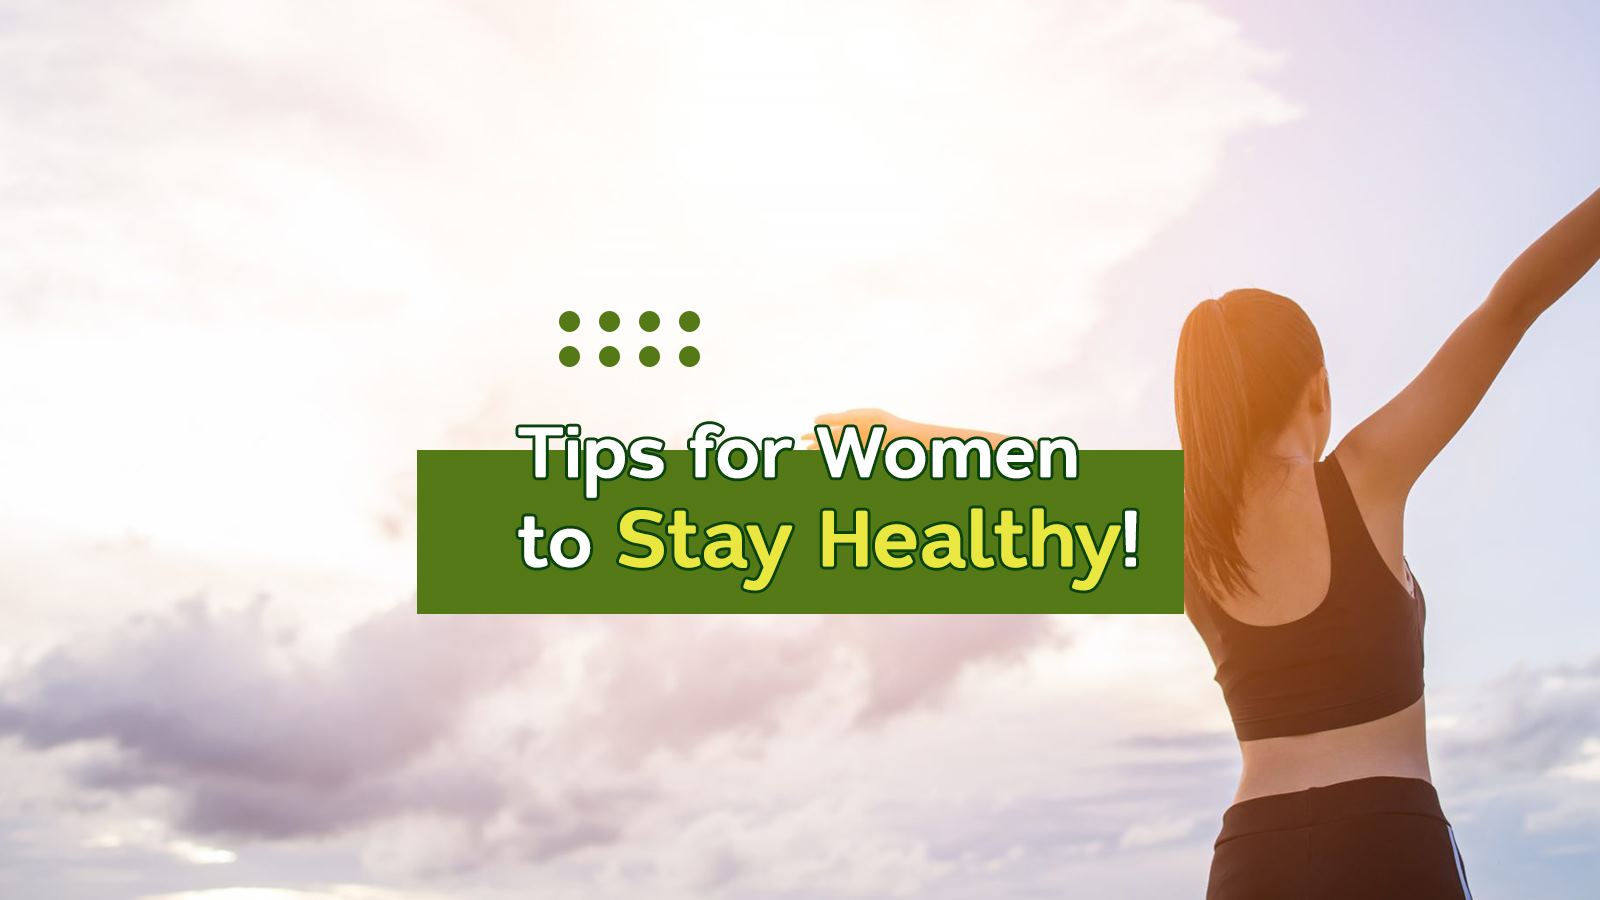 Healthy Eating and Fitness Tips for Women's Health